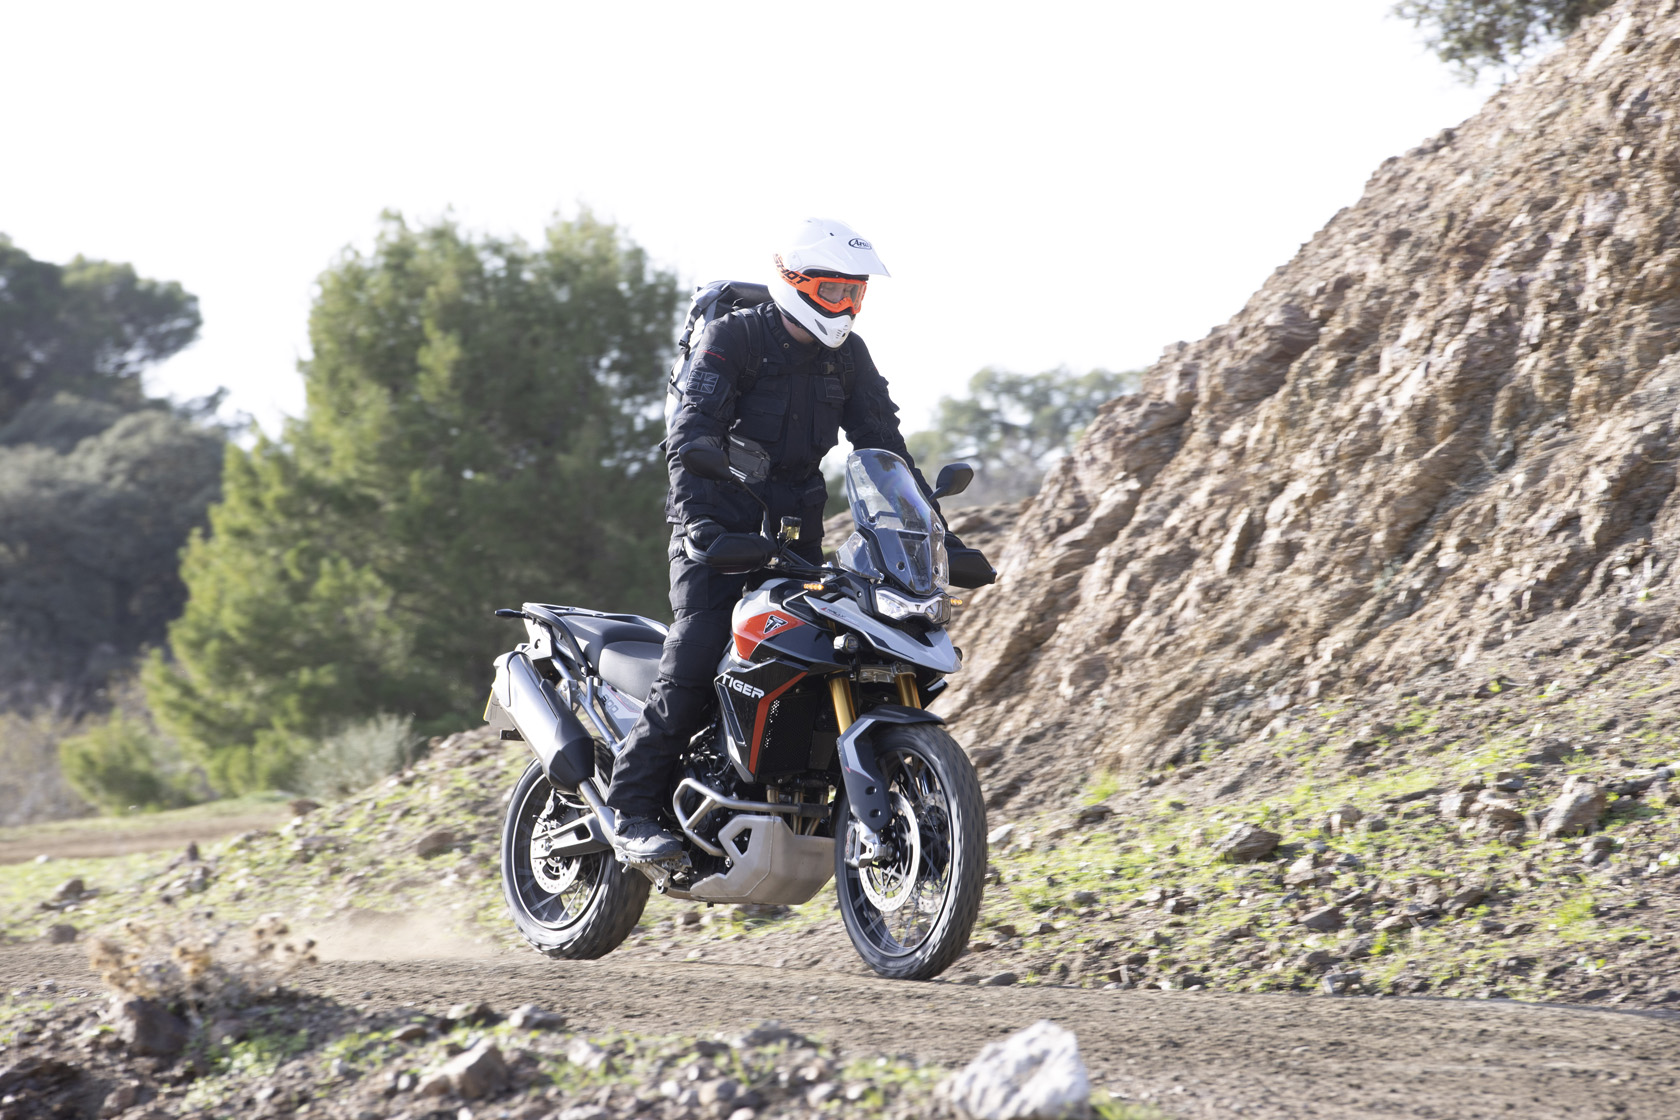 Riding off-road on the Triumph Tiger 900 Rally Pro